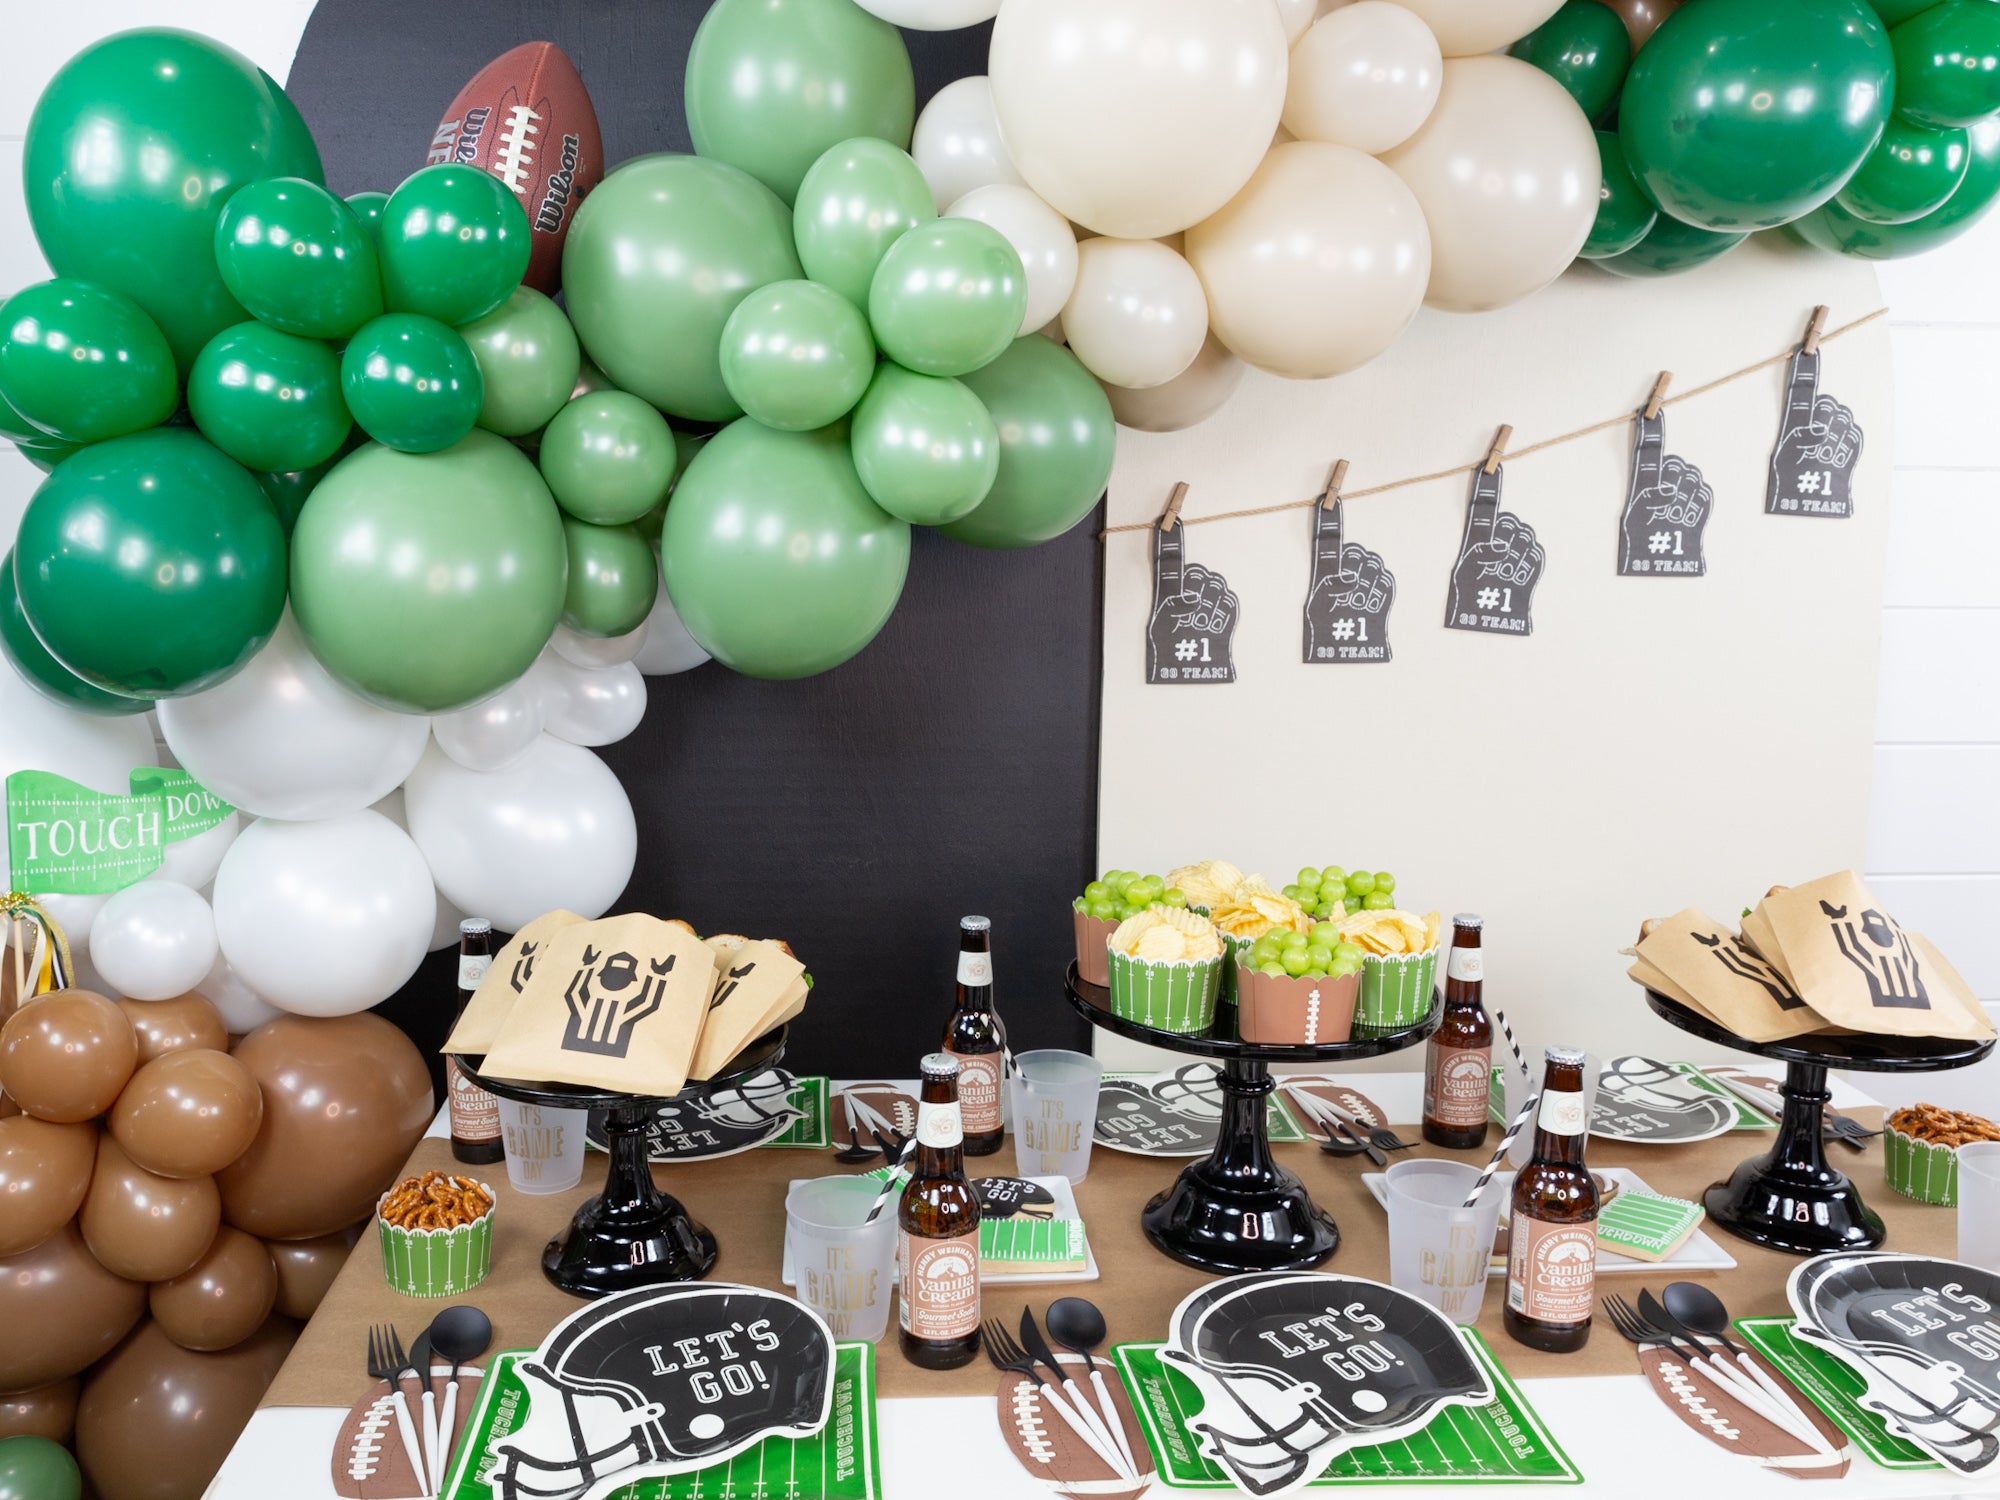 Football Party Decorations to Kick off Football Season | The Party Darling